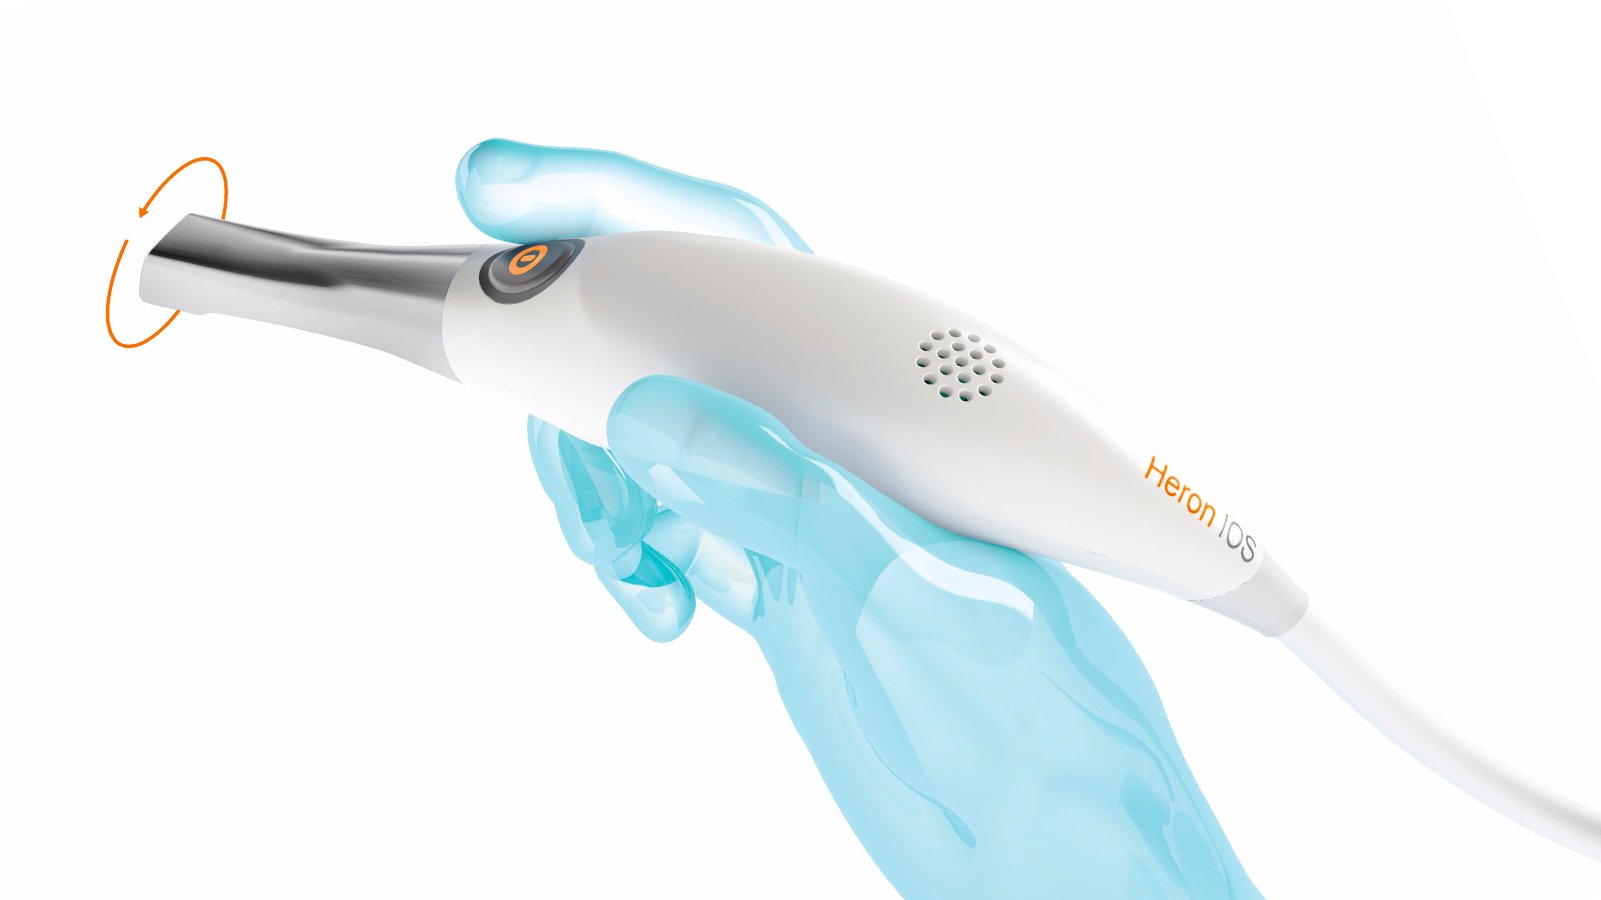 Intraoral scanners: Brand comparison, uses, and more